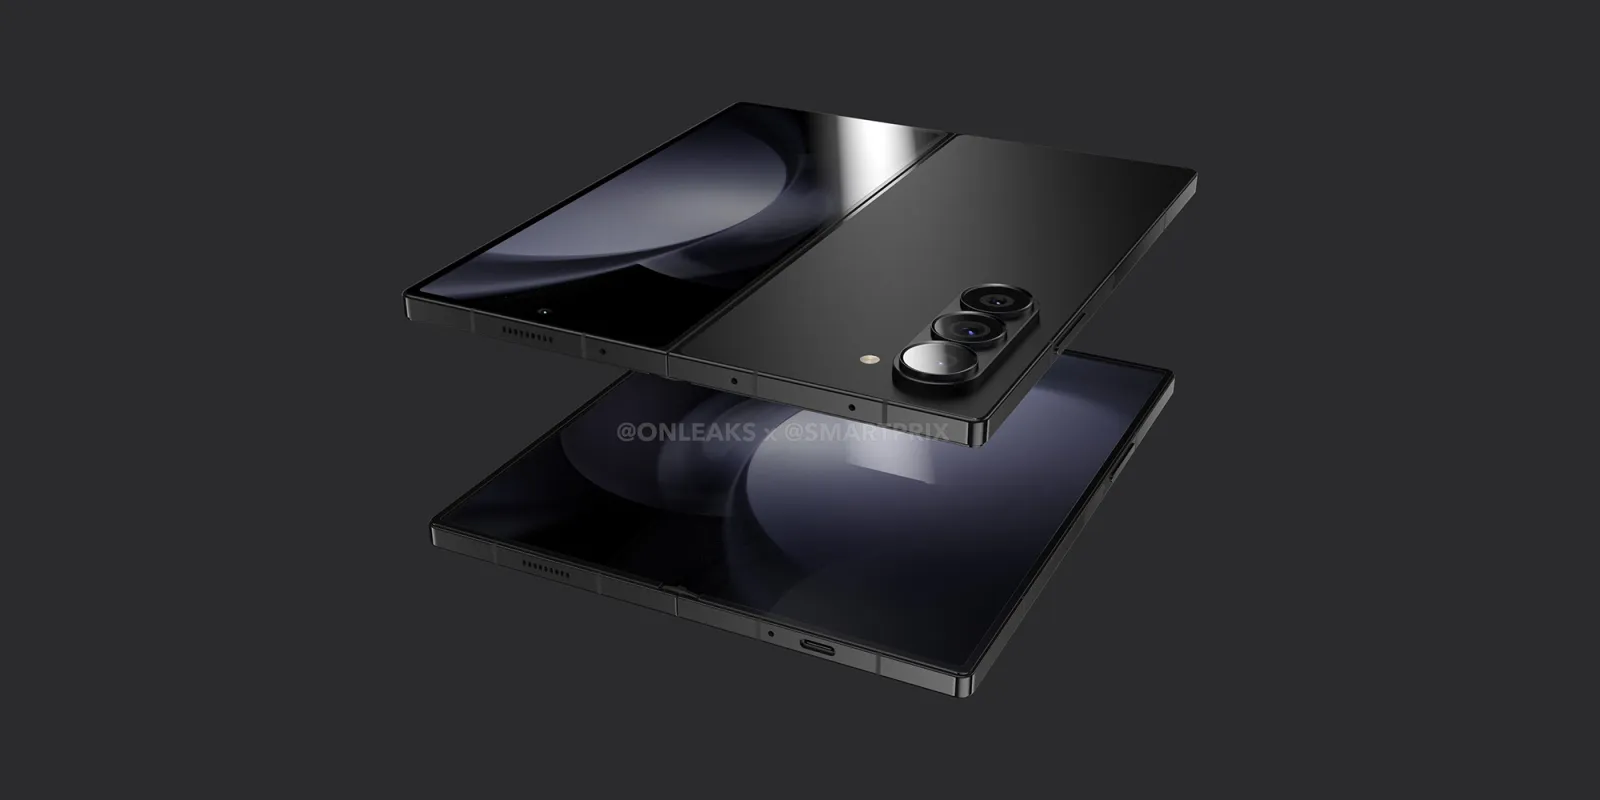 The Samsung Galaxy Fold 6 mock-up shows an angular design similar to the Galaxy S Ultra and Galaxy Note models